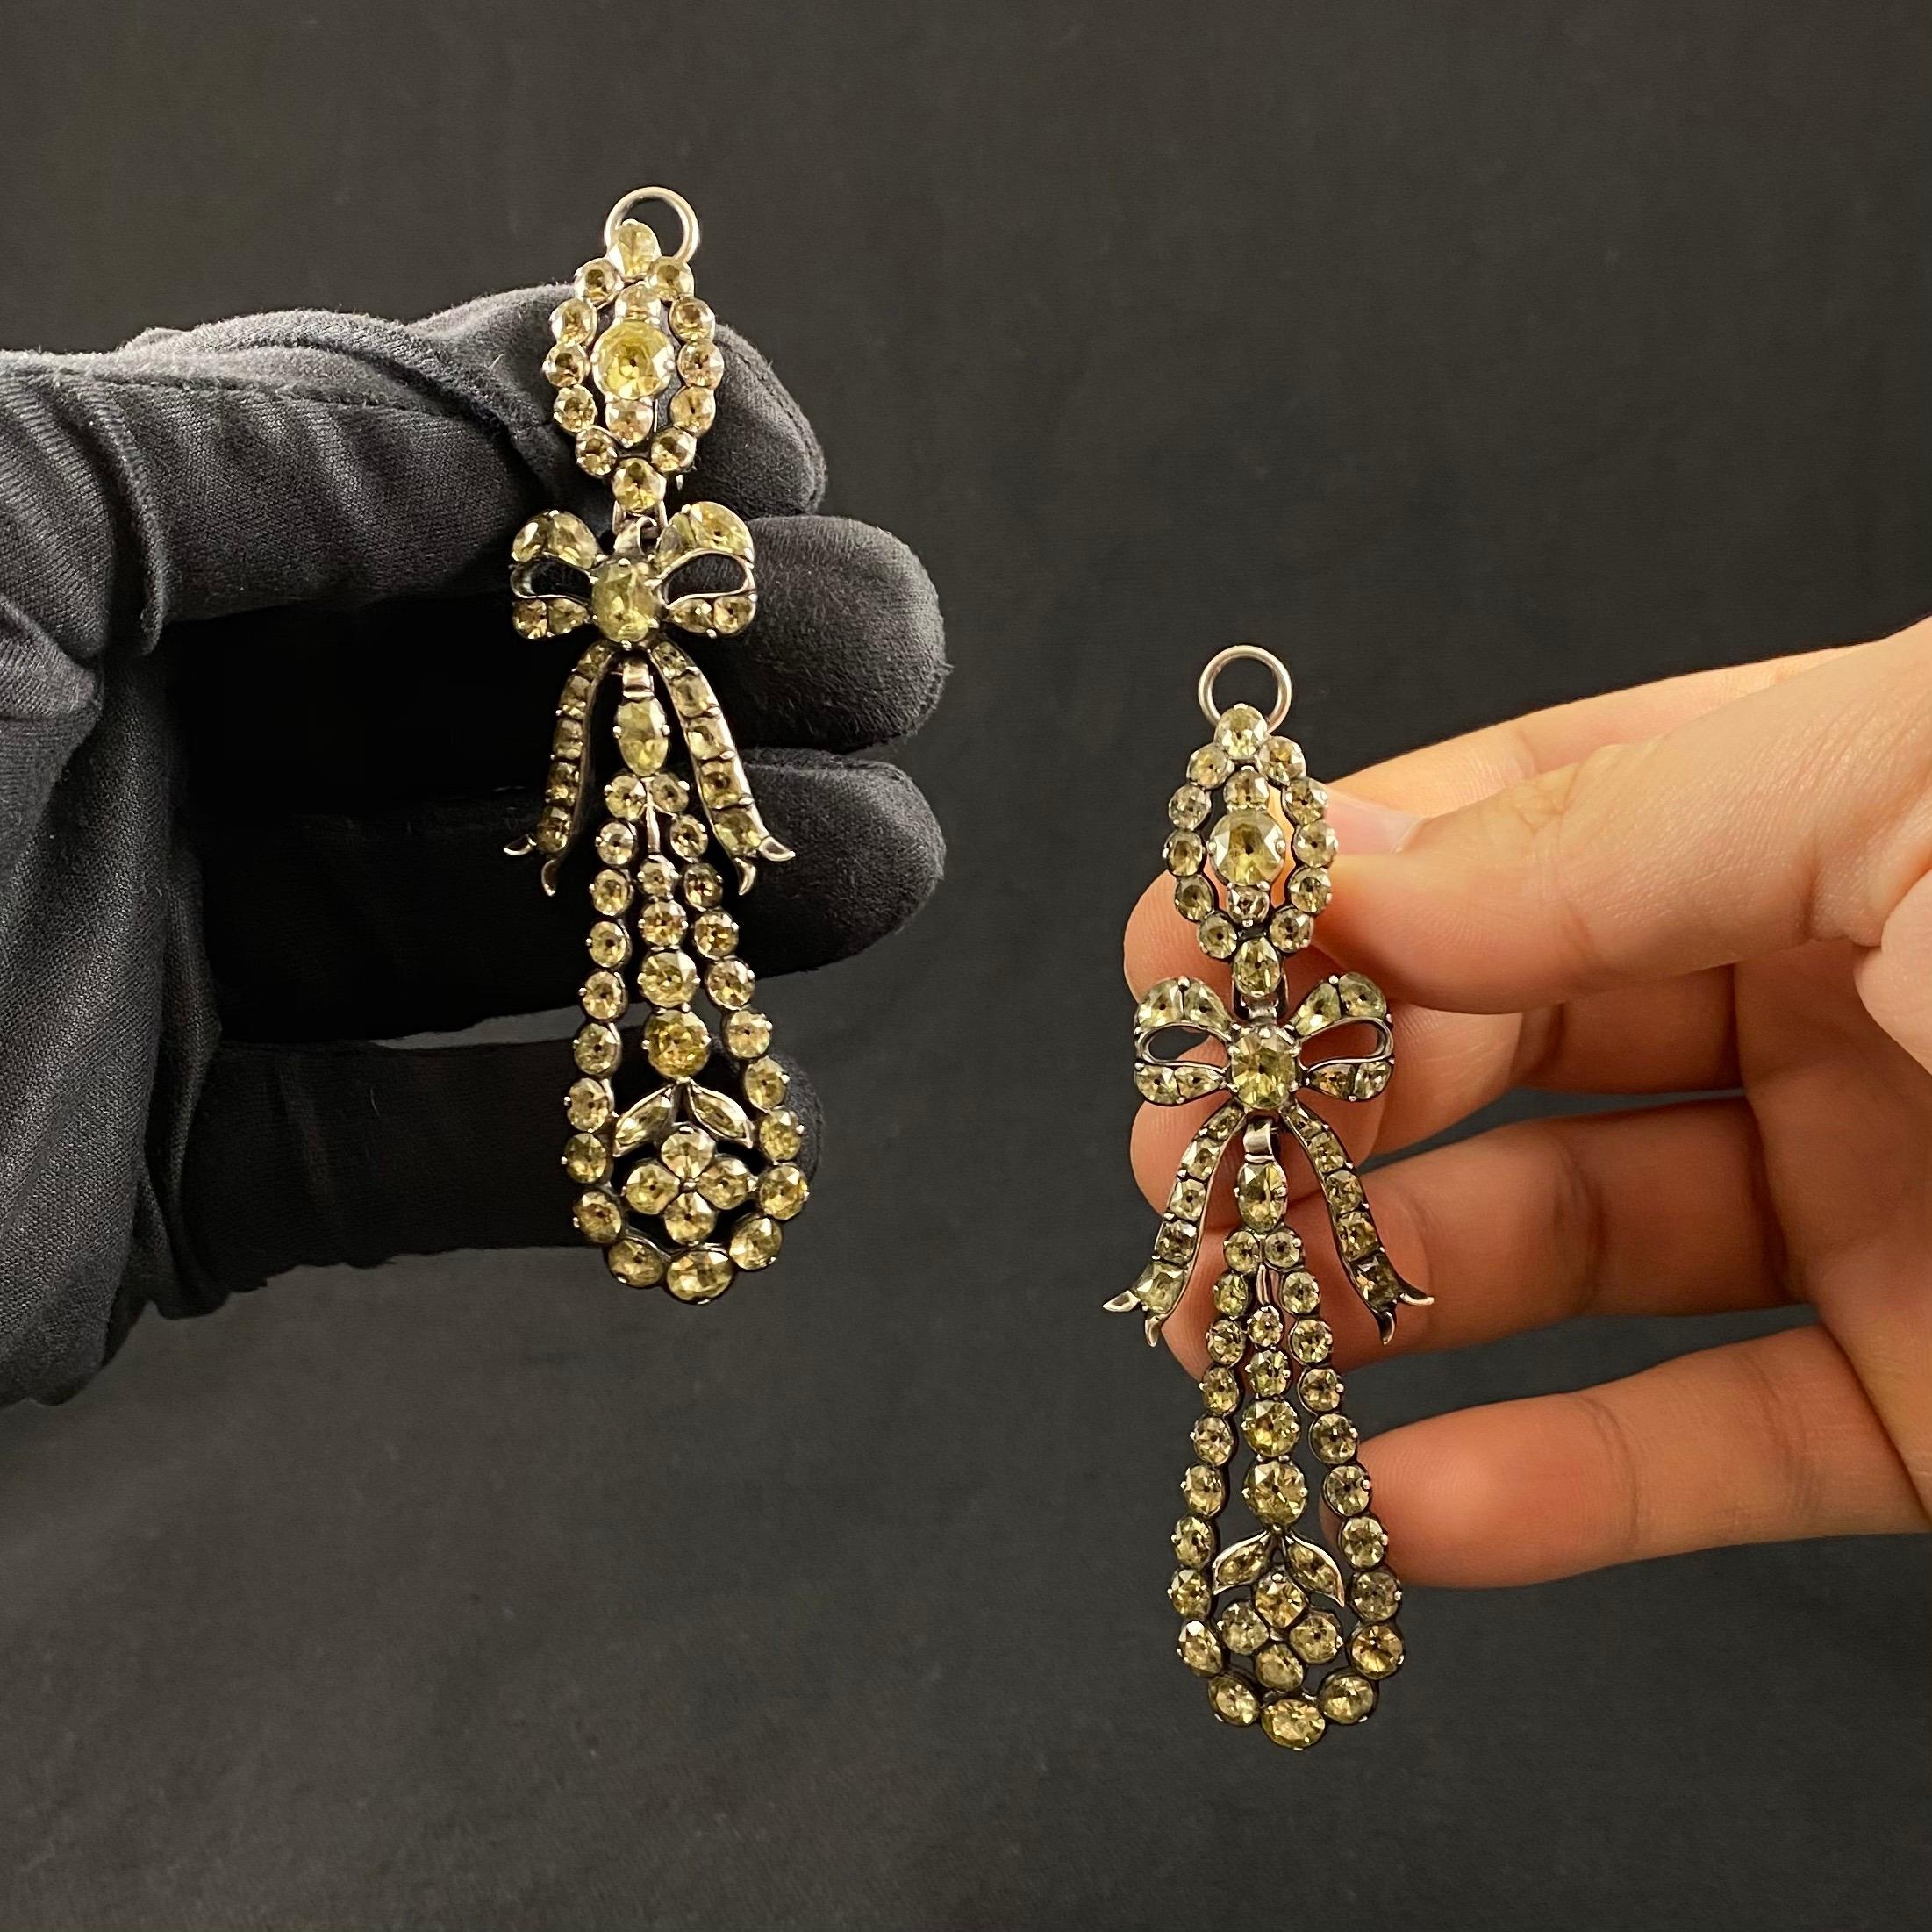 Museum Quality Antique 18th Century Chrysolite Chrysoberyl Pendeloque Pendant Earrings, Portugal, c. 1780. Each earring of an openwork design with a navette shape cluster top suspending a ribbon tied bow and hung with a flowerhead in tear-drop